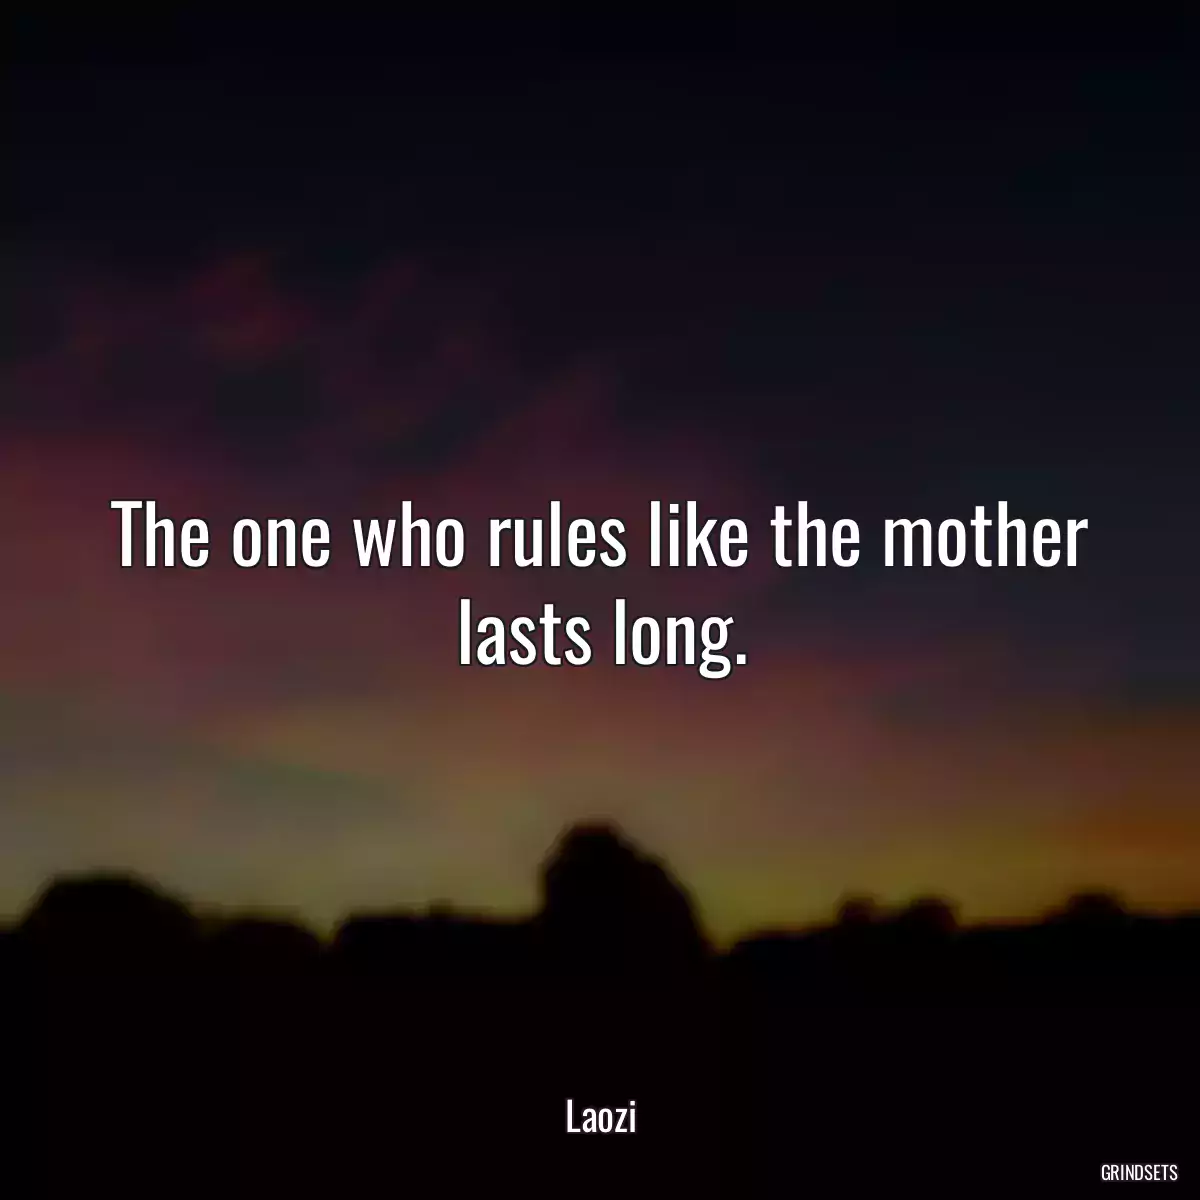 The one who rules like the mother lasts long.